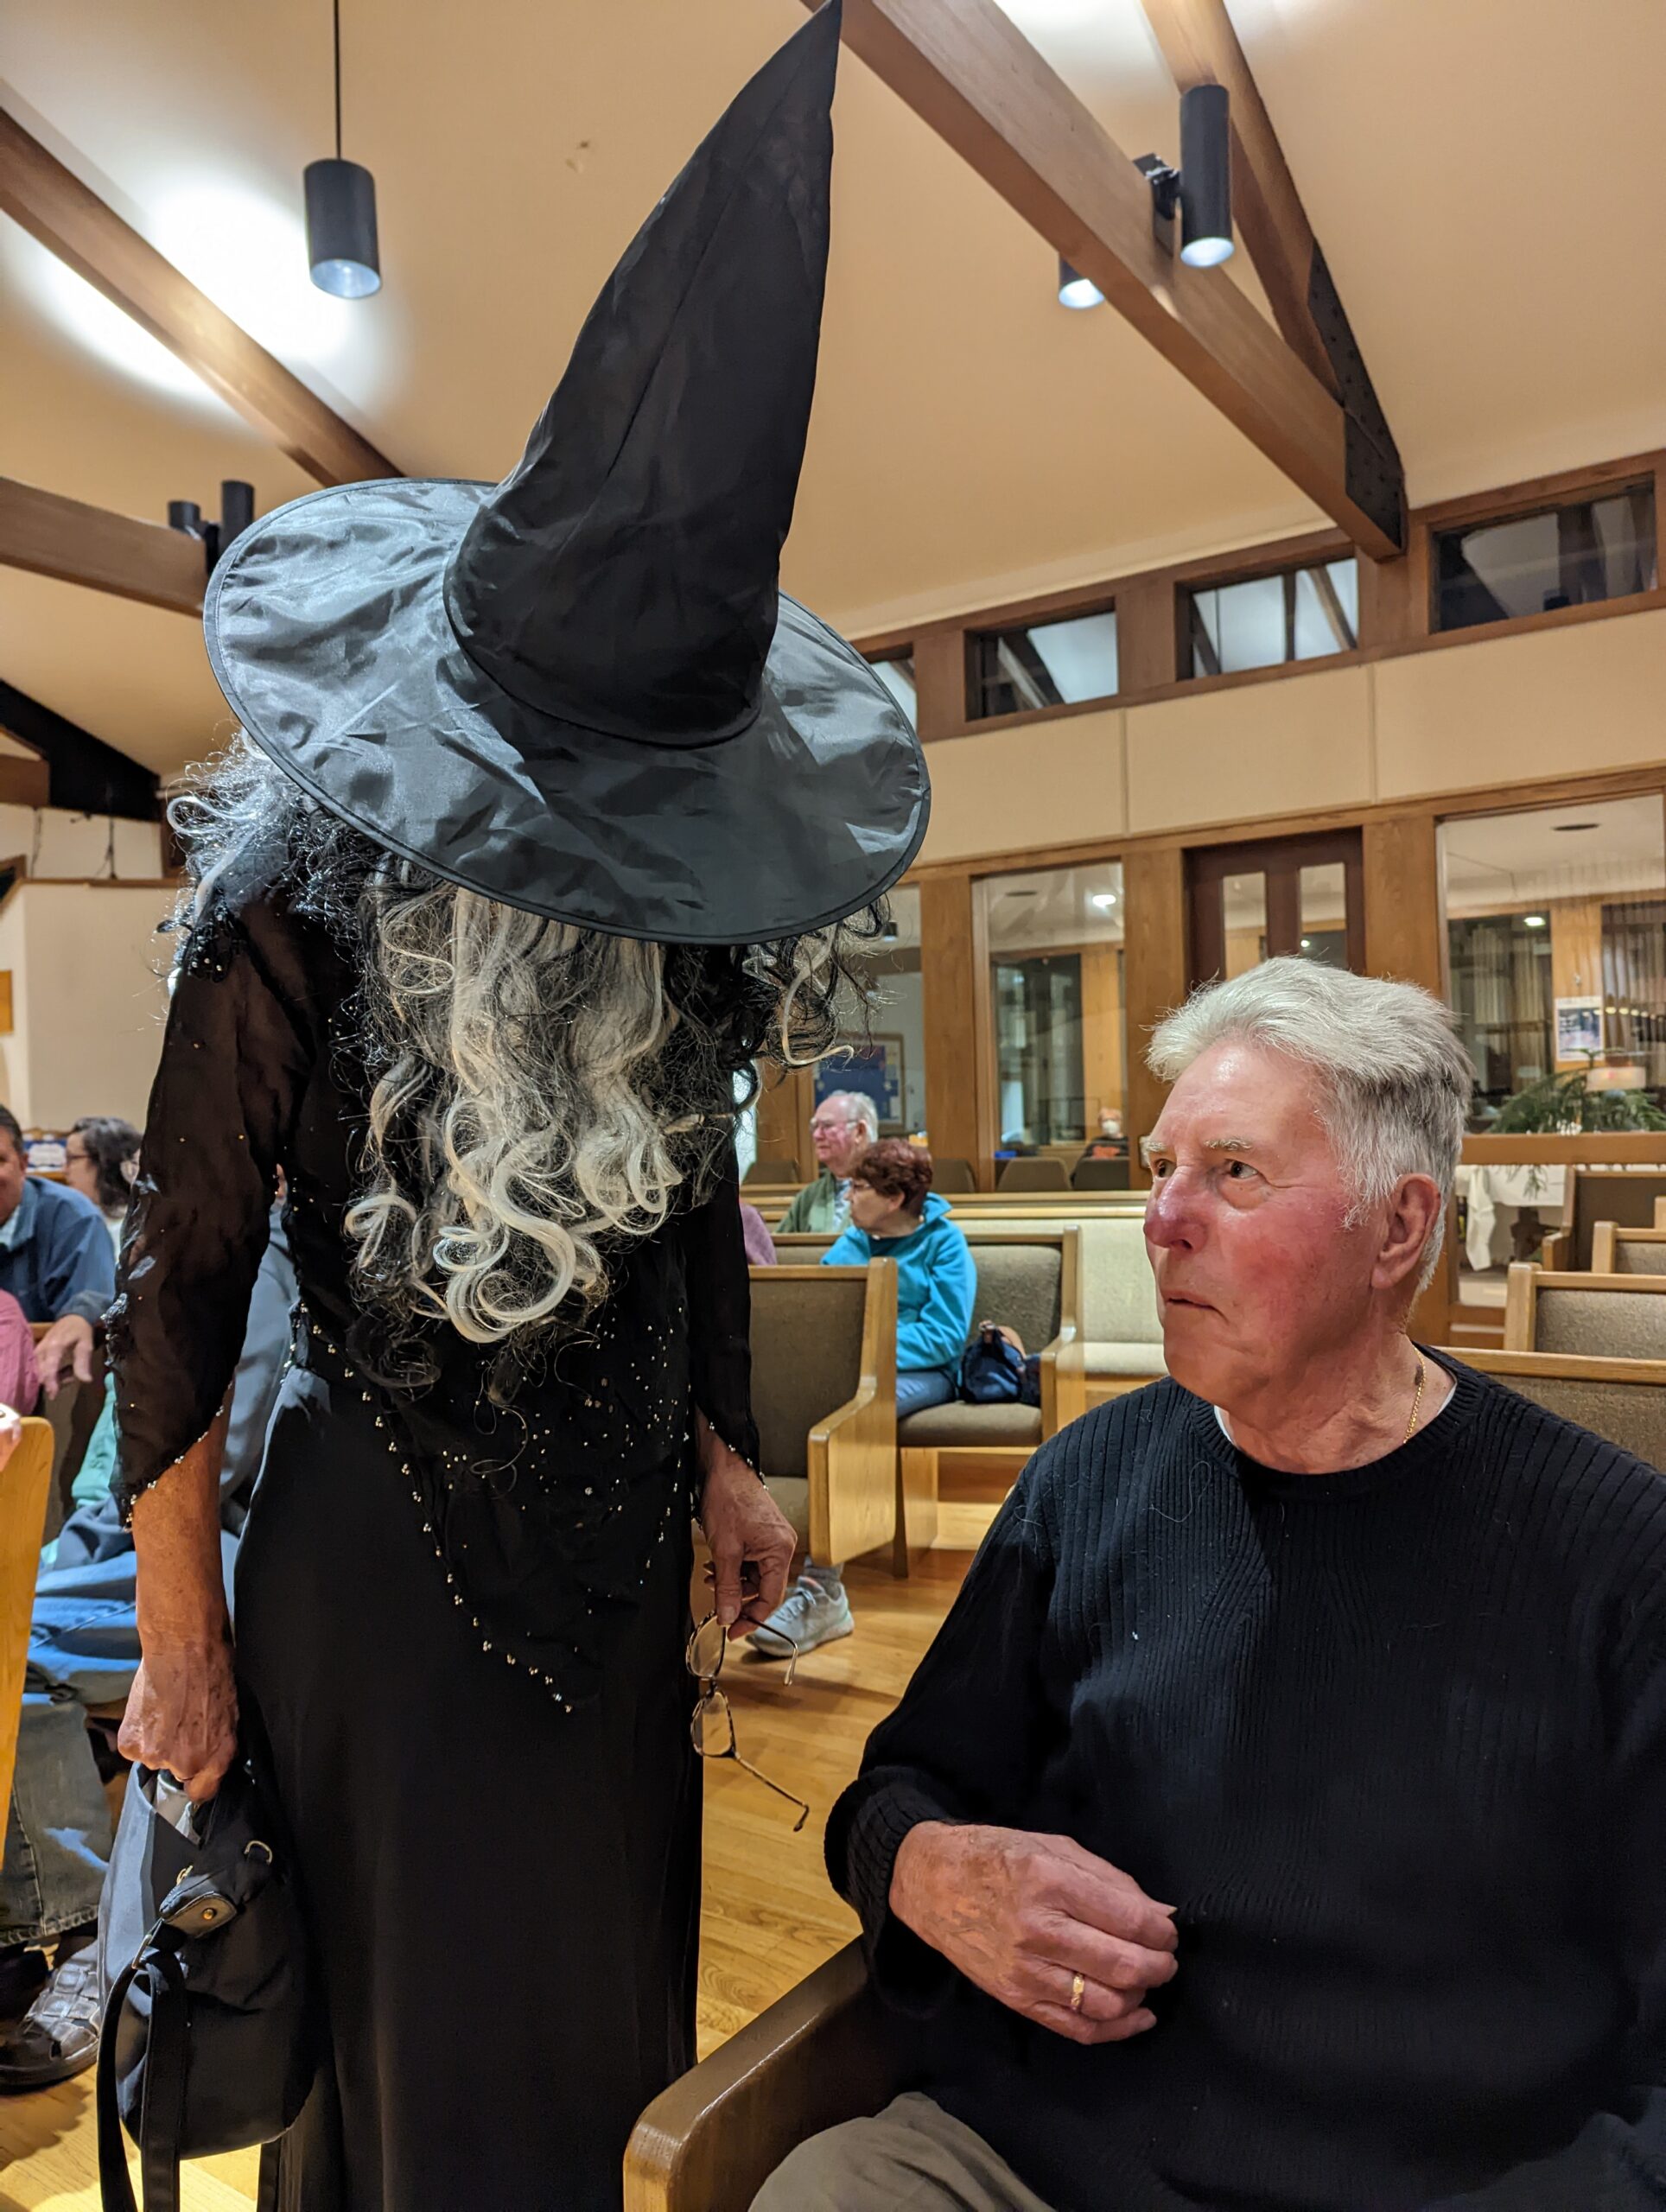 David Dahl conversing with witch